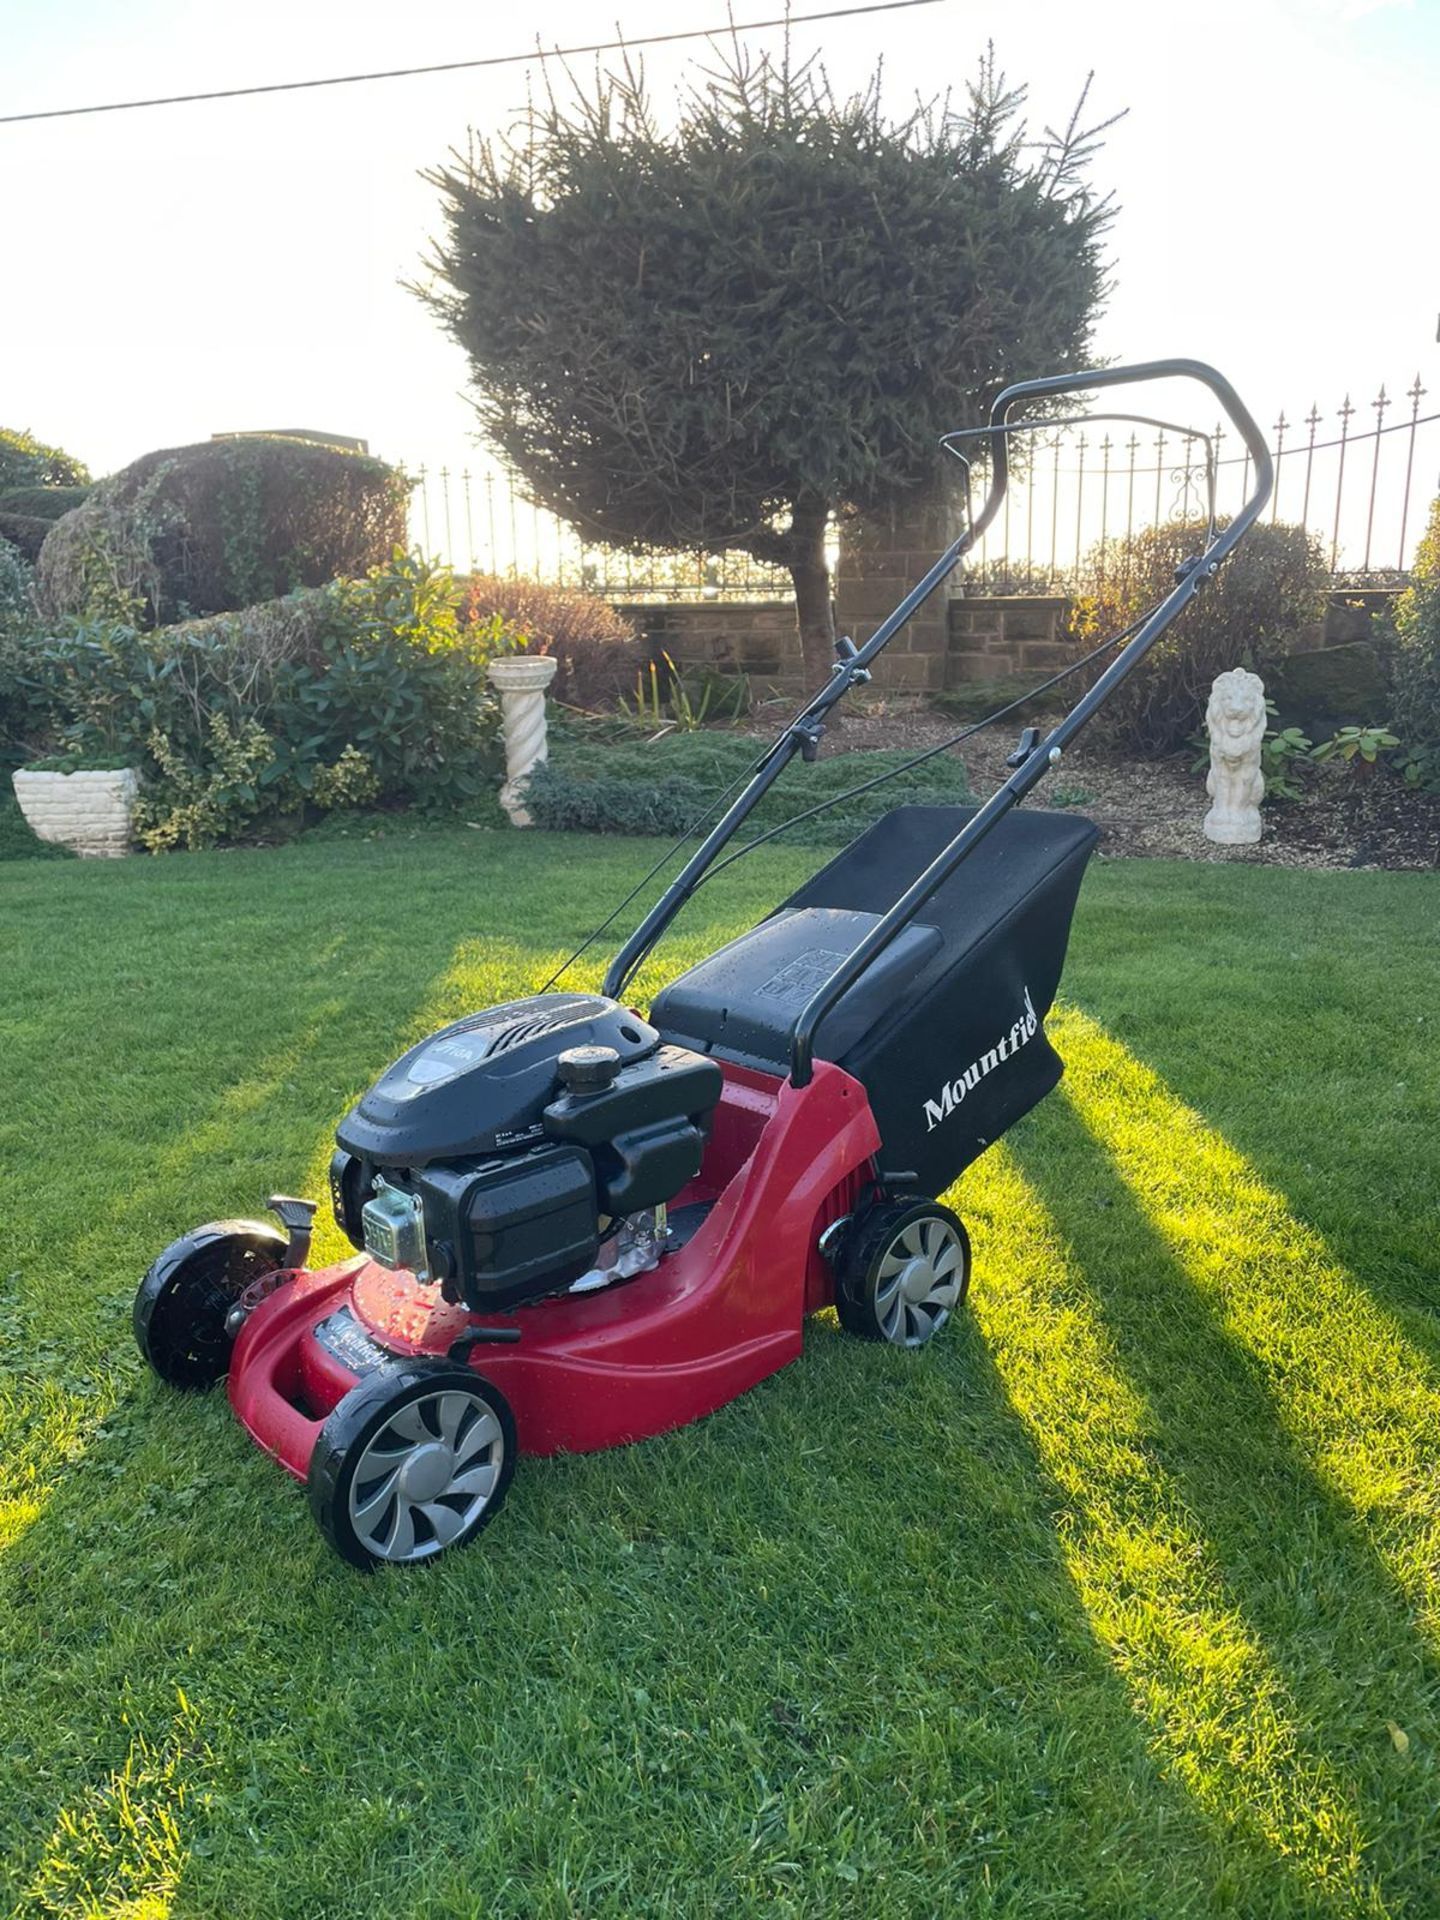 NEW AND UNUSED 2021 MOUNTFIELD EP 414 PUSH LAWN MOWER, FULLY ASSEMBLED *NO VAT* - Image 4 of 5